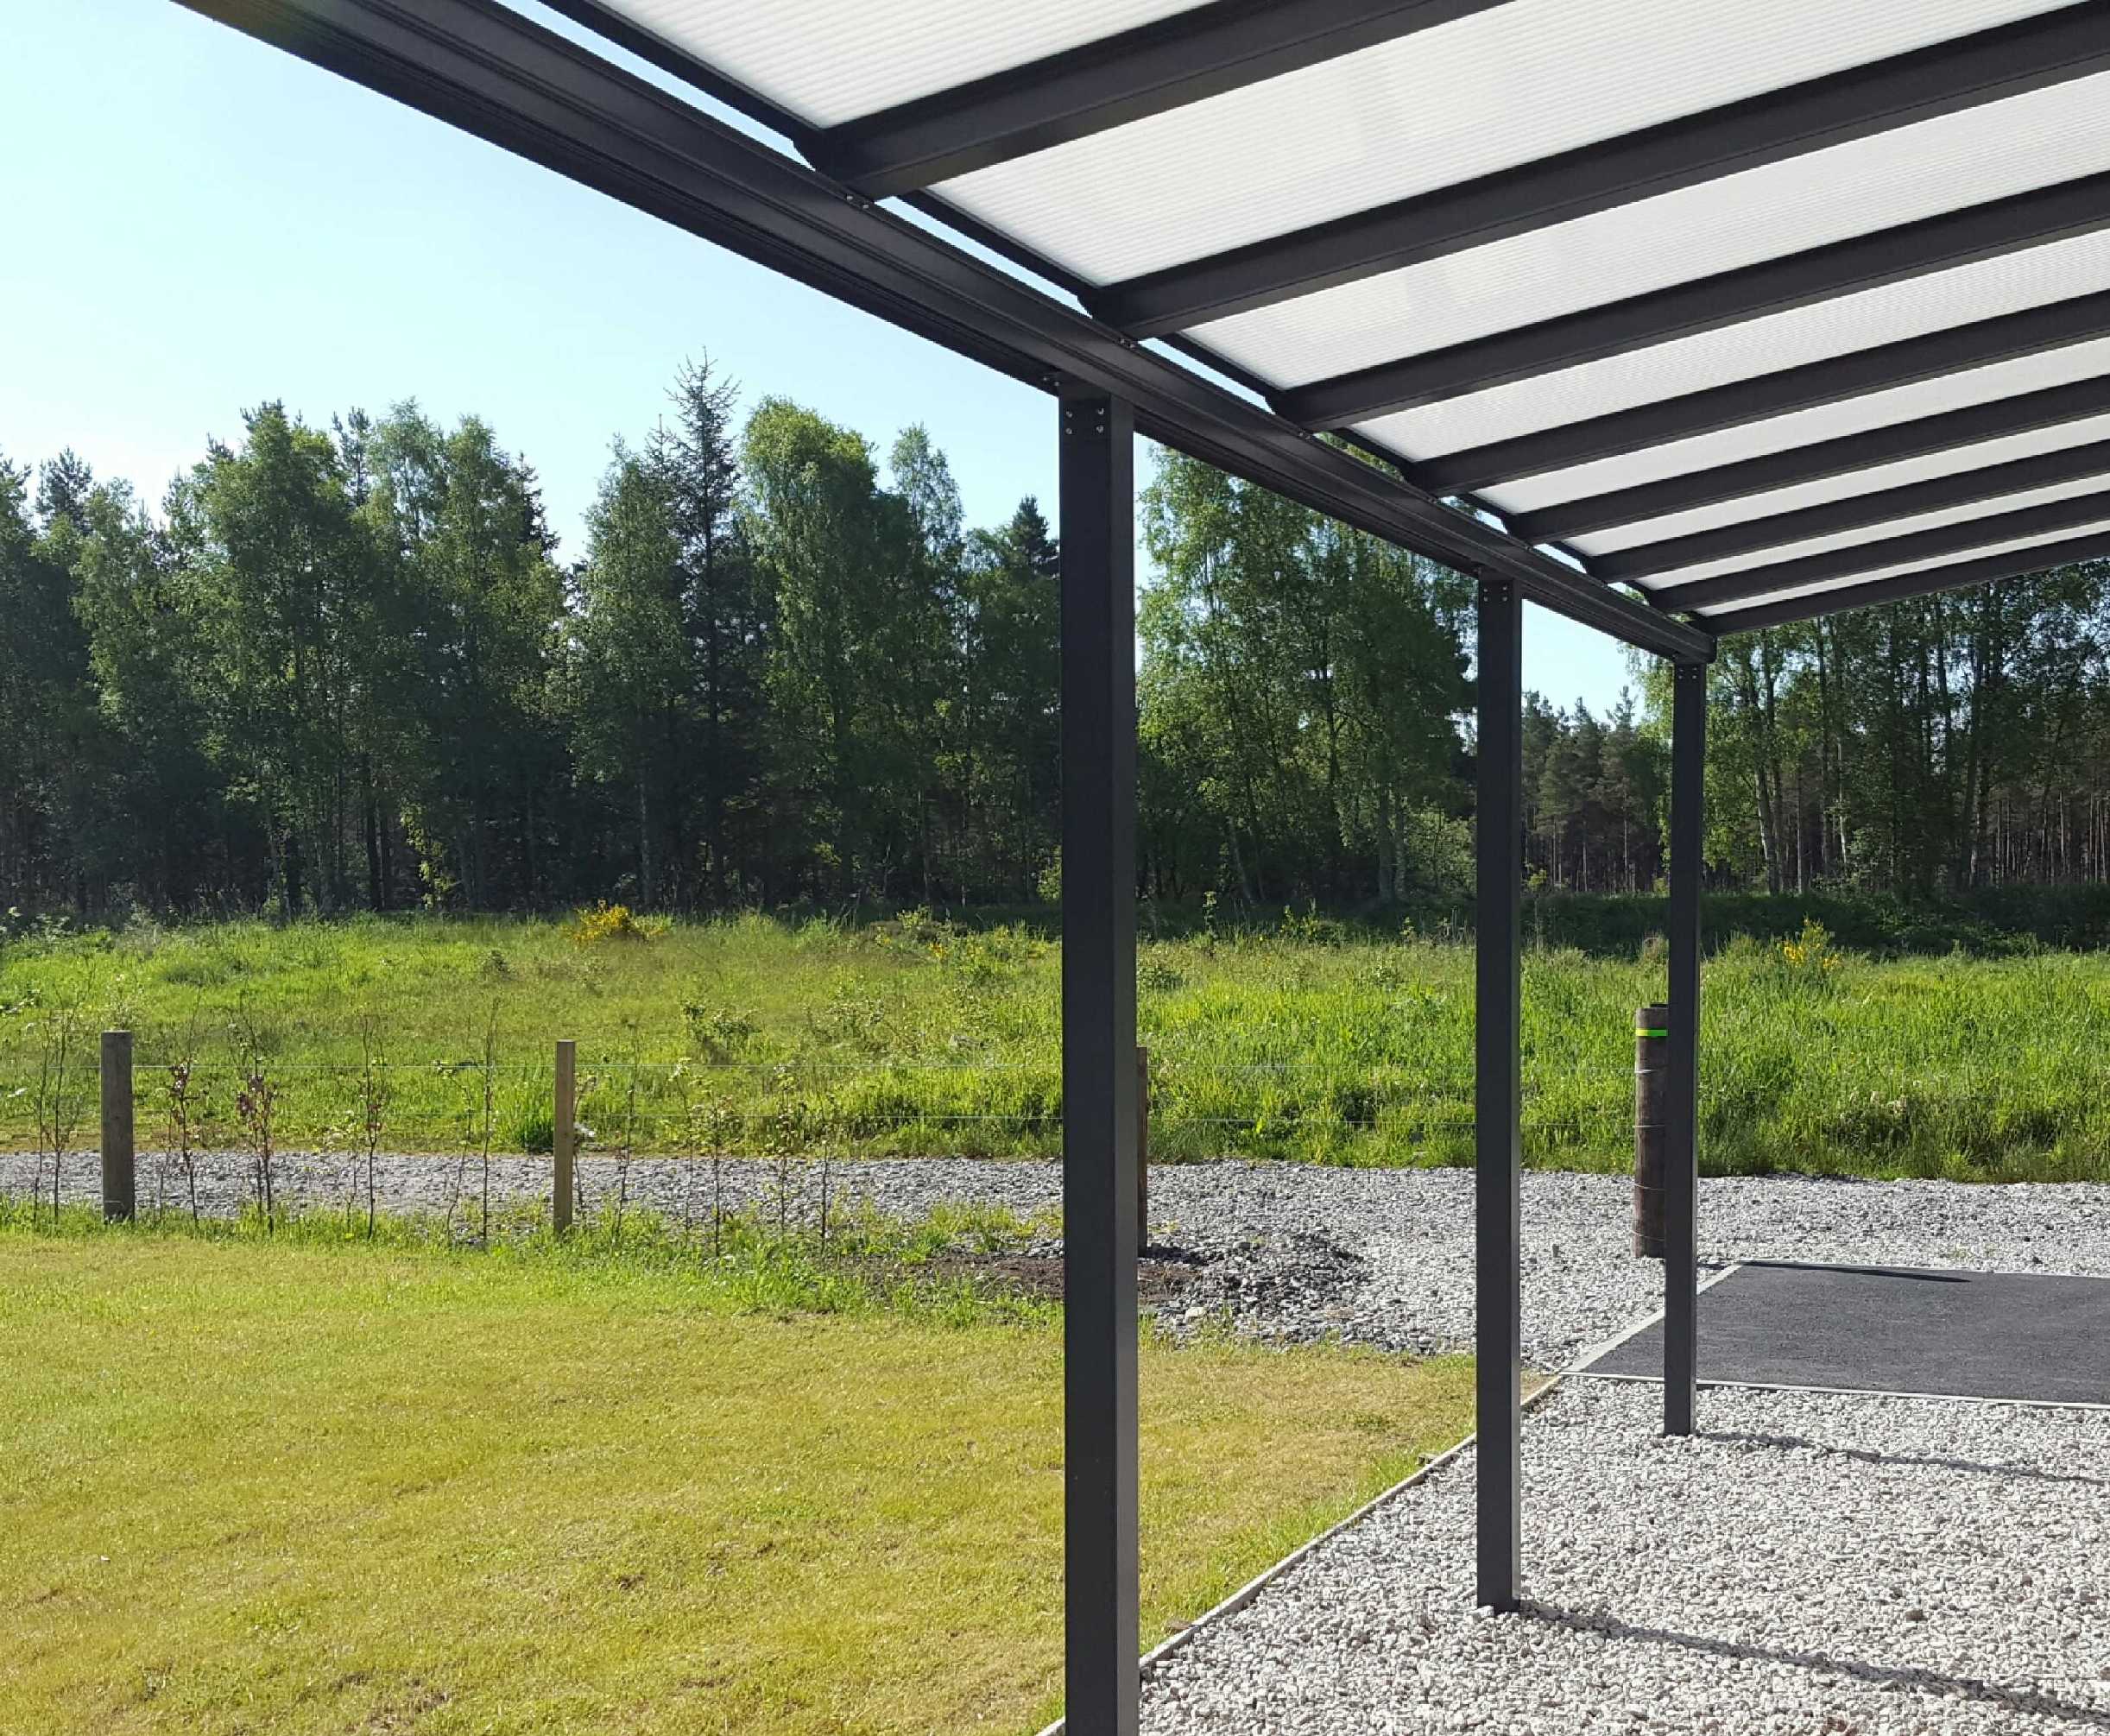 Omega Smart Lean-To Canopy, Anthracite Grey, 6mm Glass Clear Plate Polycarbonate Glazing - 2.1m (W) x 2.5m (P), (2) Supporting Posts